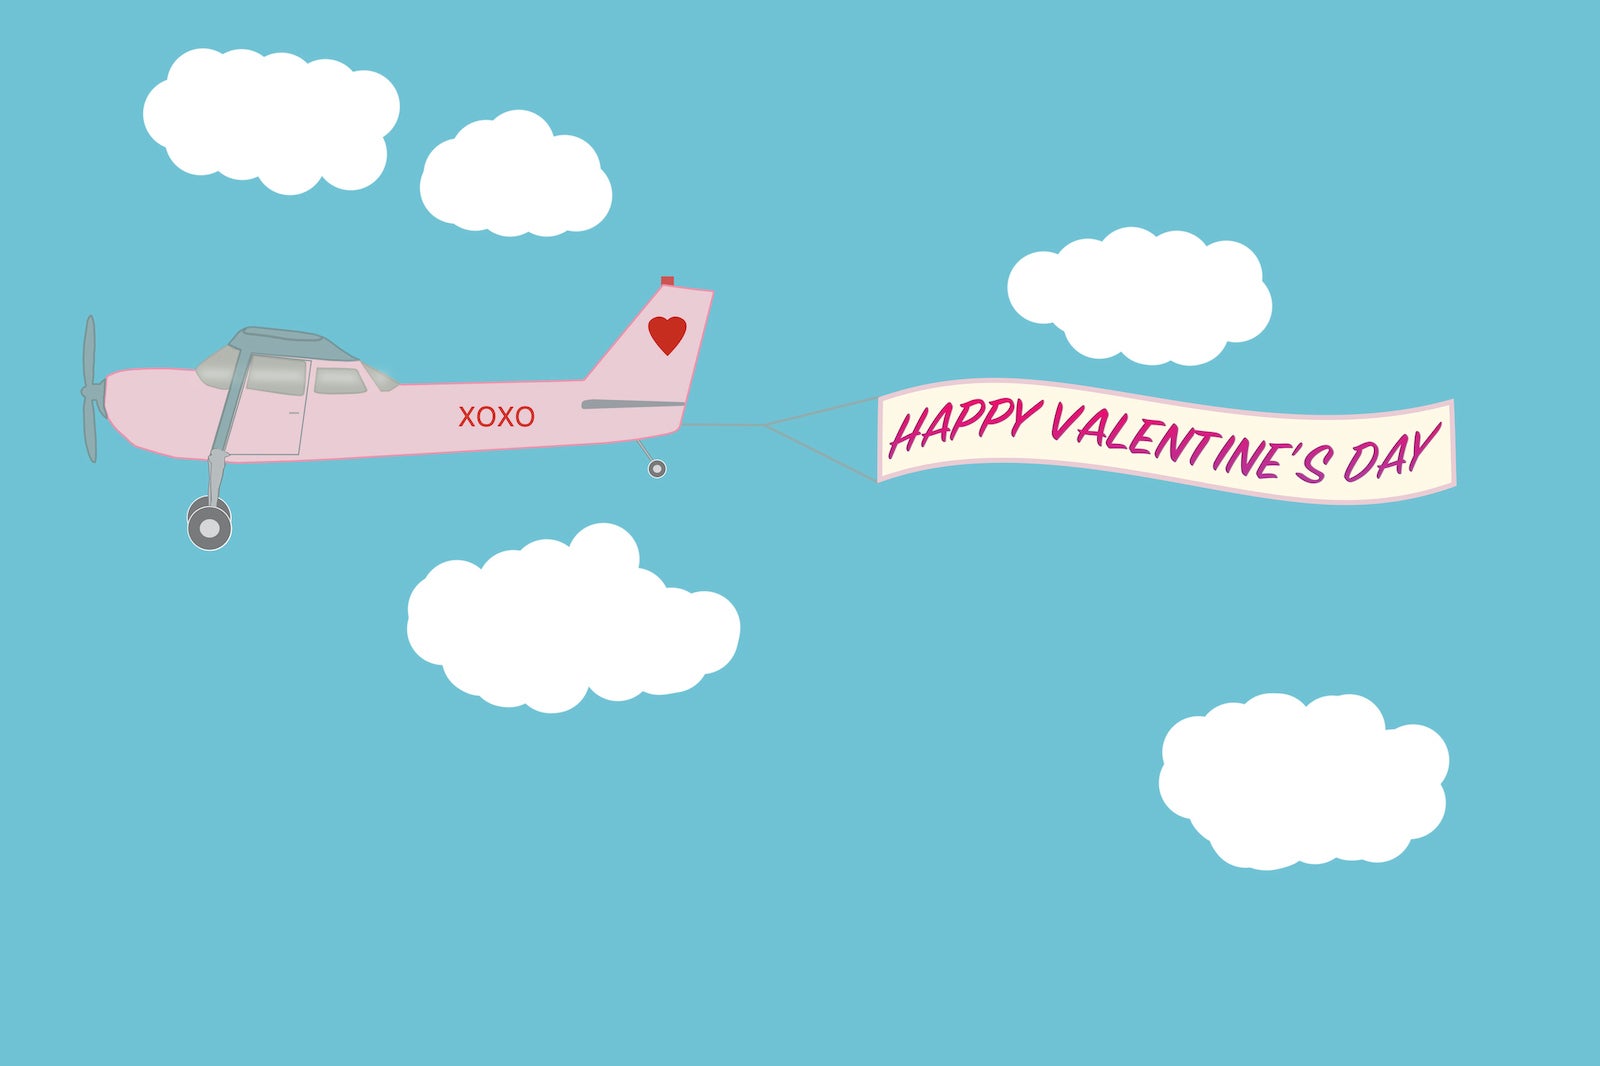 Catch flights, not feelings with Alaska’s 2-day ‘Booking for Love’ sale